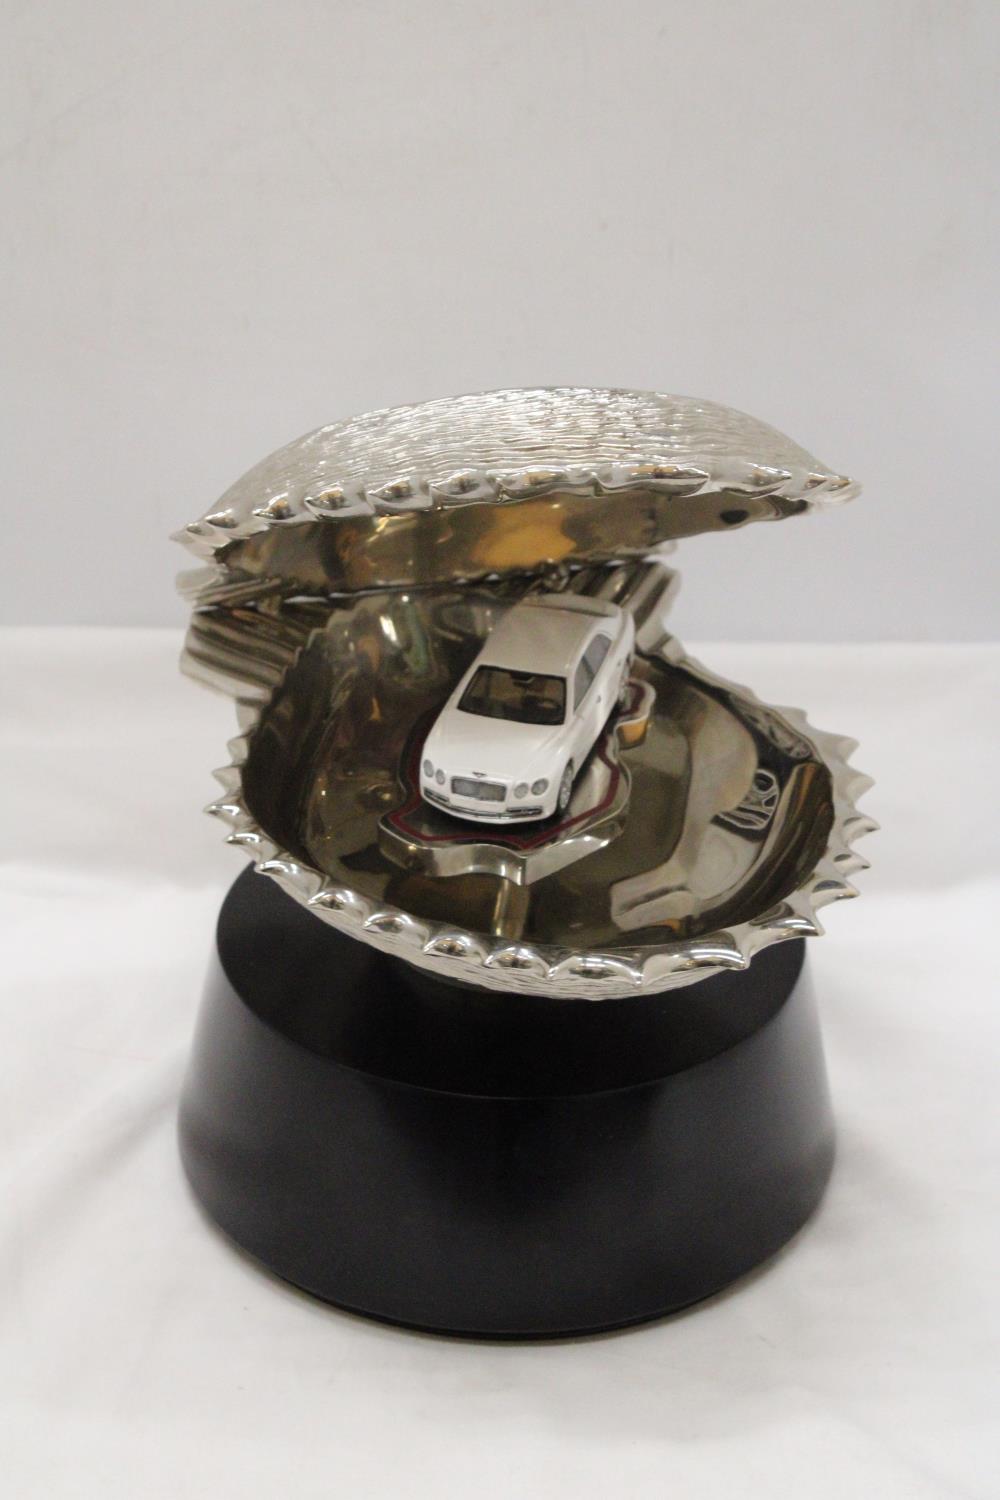 A LARGE CHROME OYSTER SHELL, ENCLOSING A BENTLEY CAR, ON A BASE, HEIGHT 30CM, DIAMETER APPROX 24CM